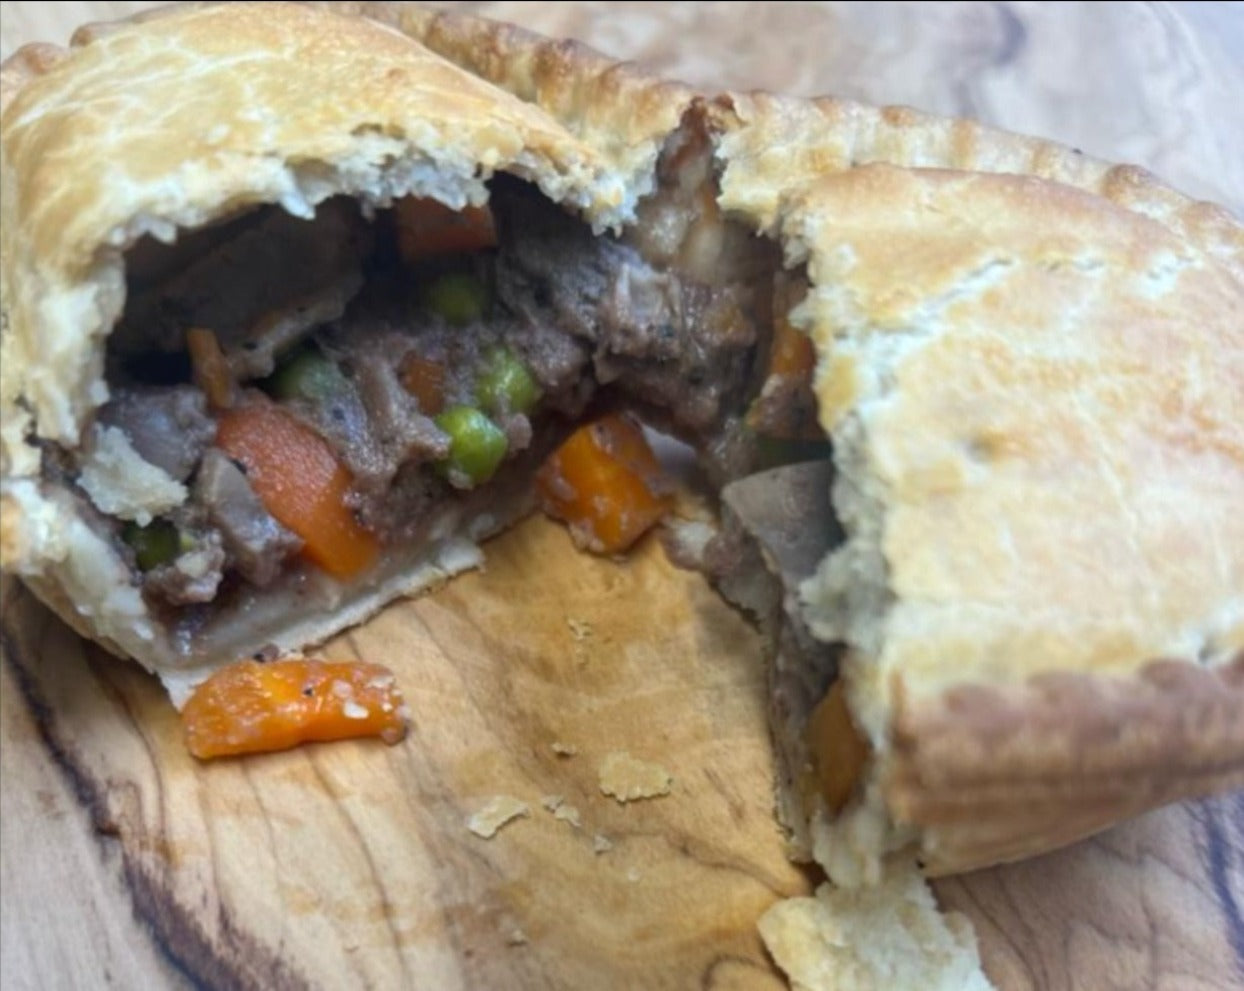 Fork-tender beef and kidney pieces with carrots, peas and onions in a rich gravy. Encased in a shortcrust pastry, cut in half